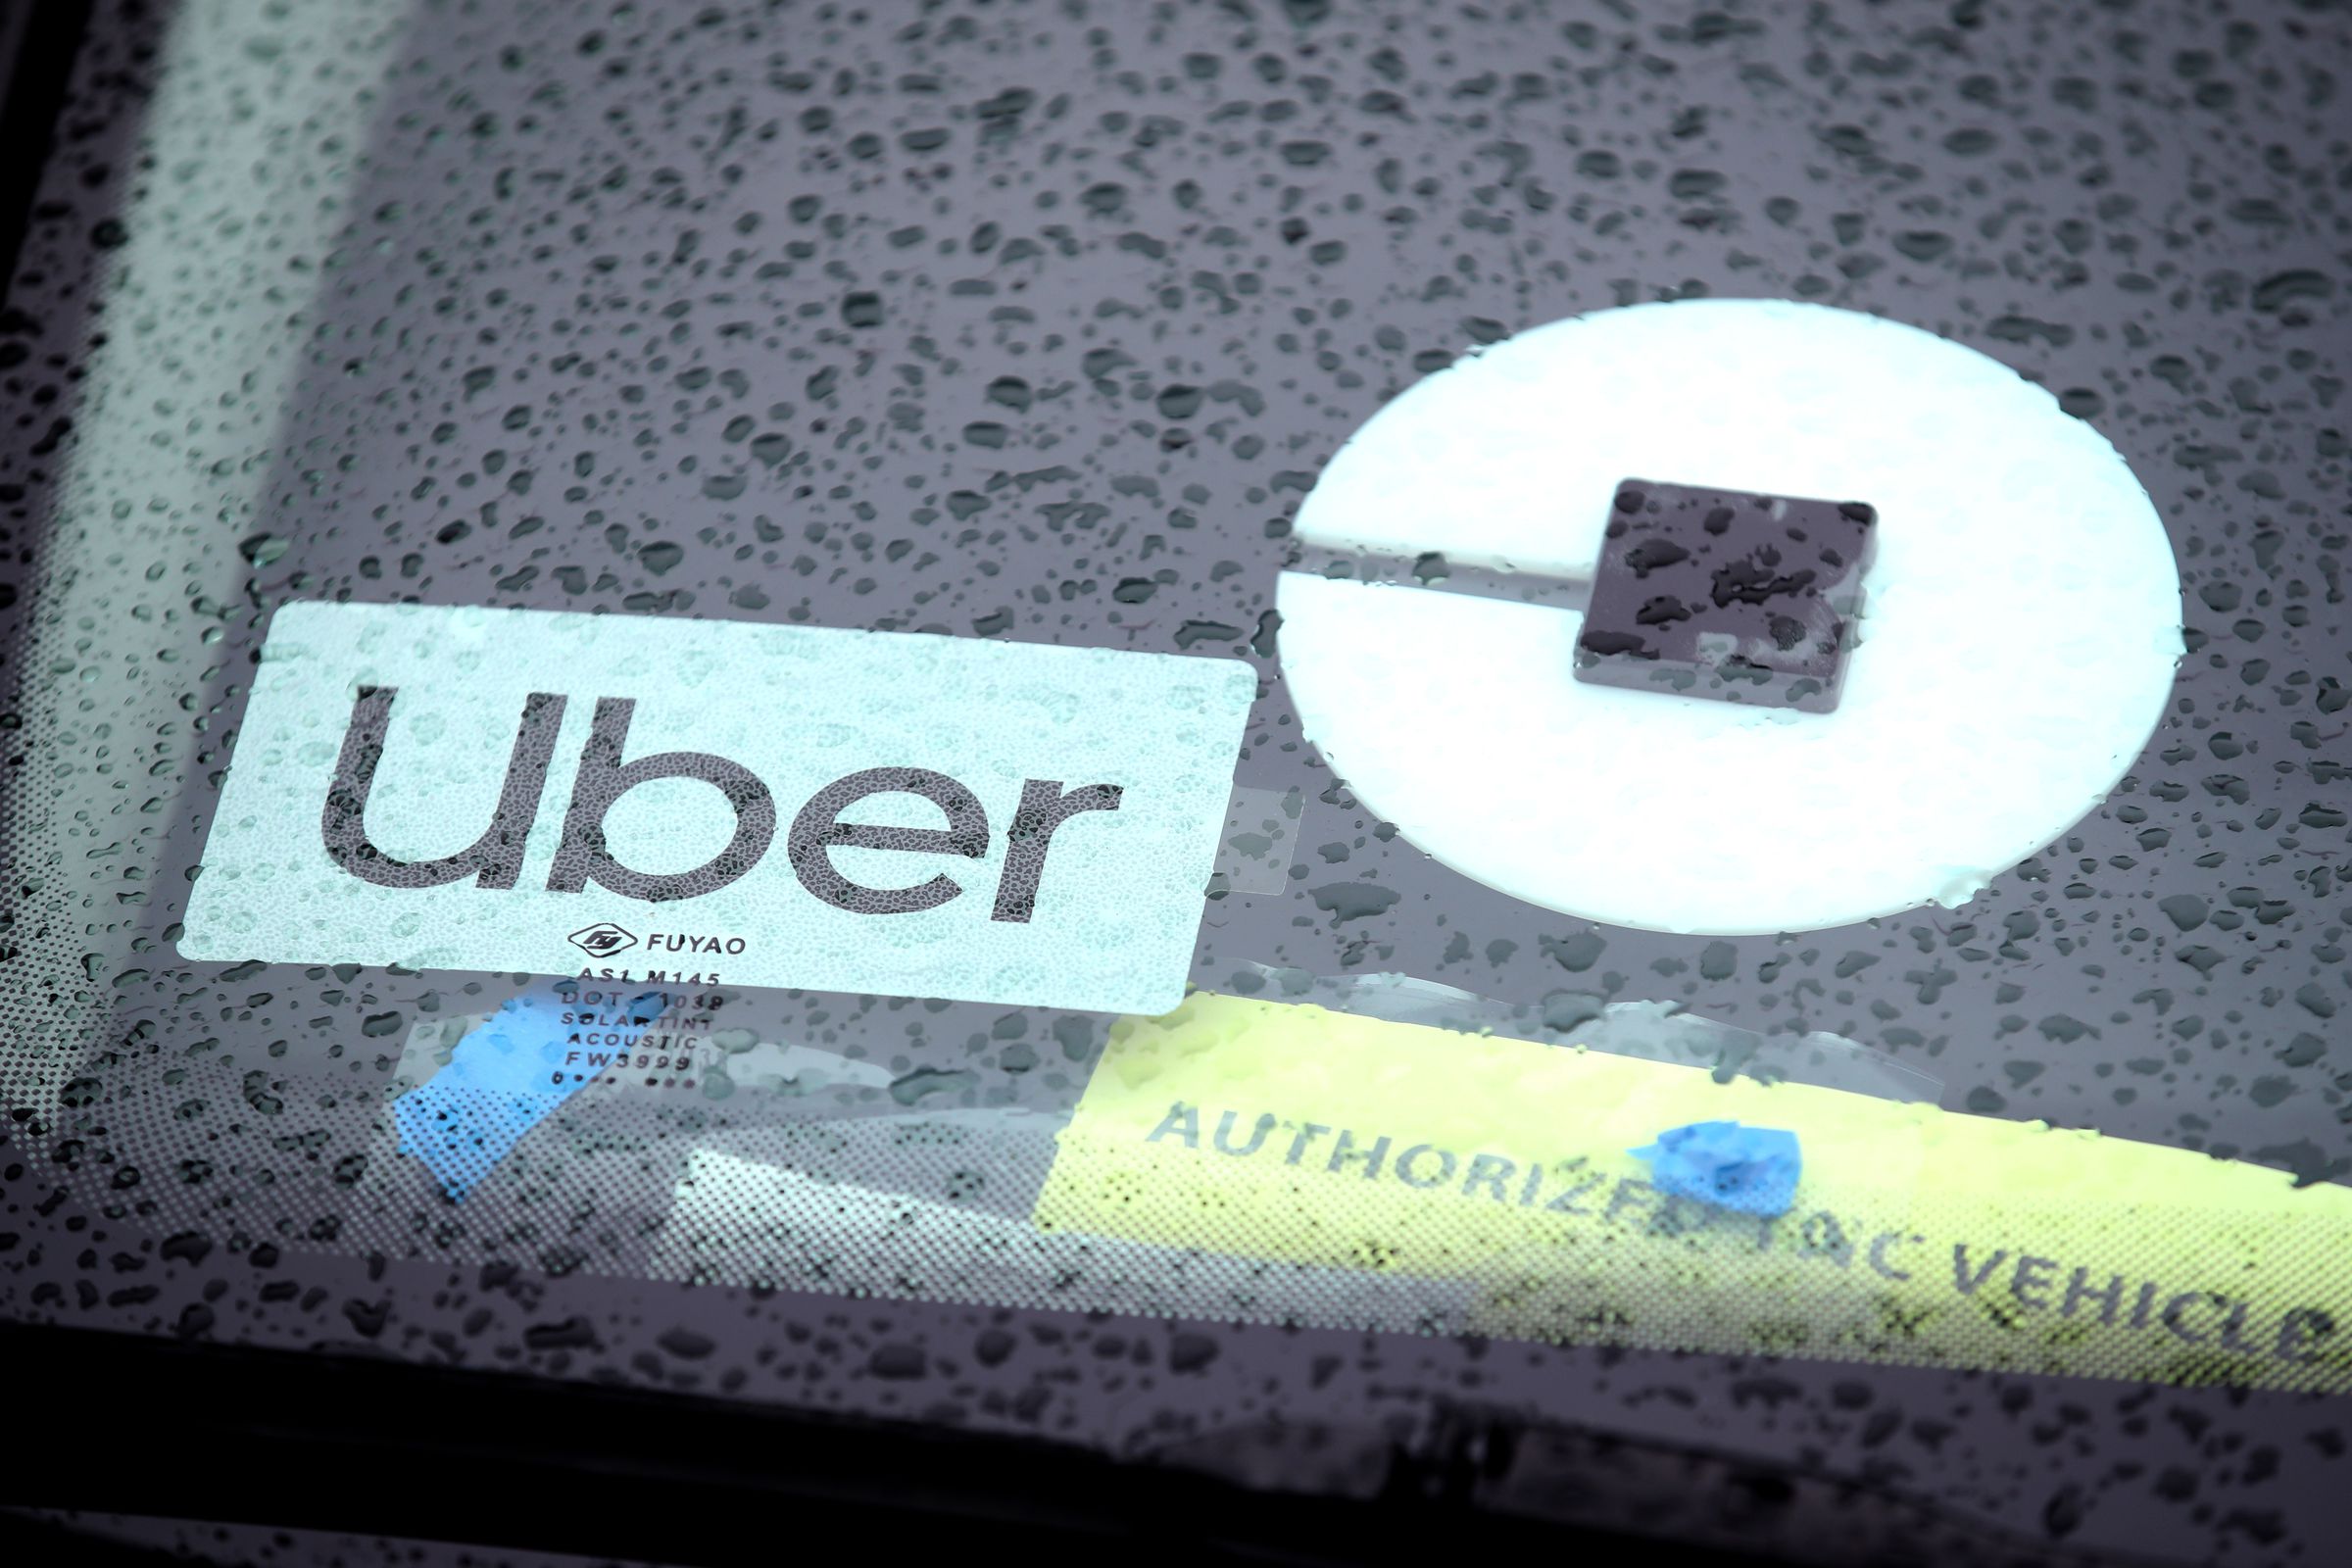 Ride Hailing App Uber Prepares For Its IPO On The New York Stock Exchange